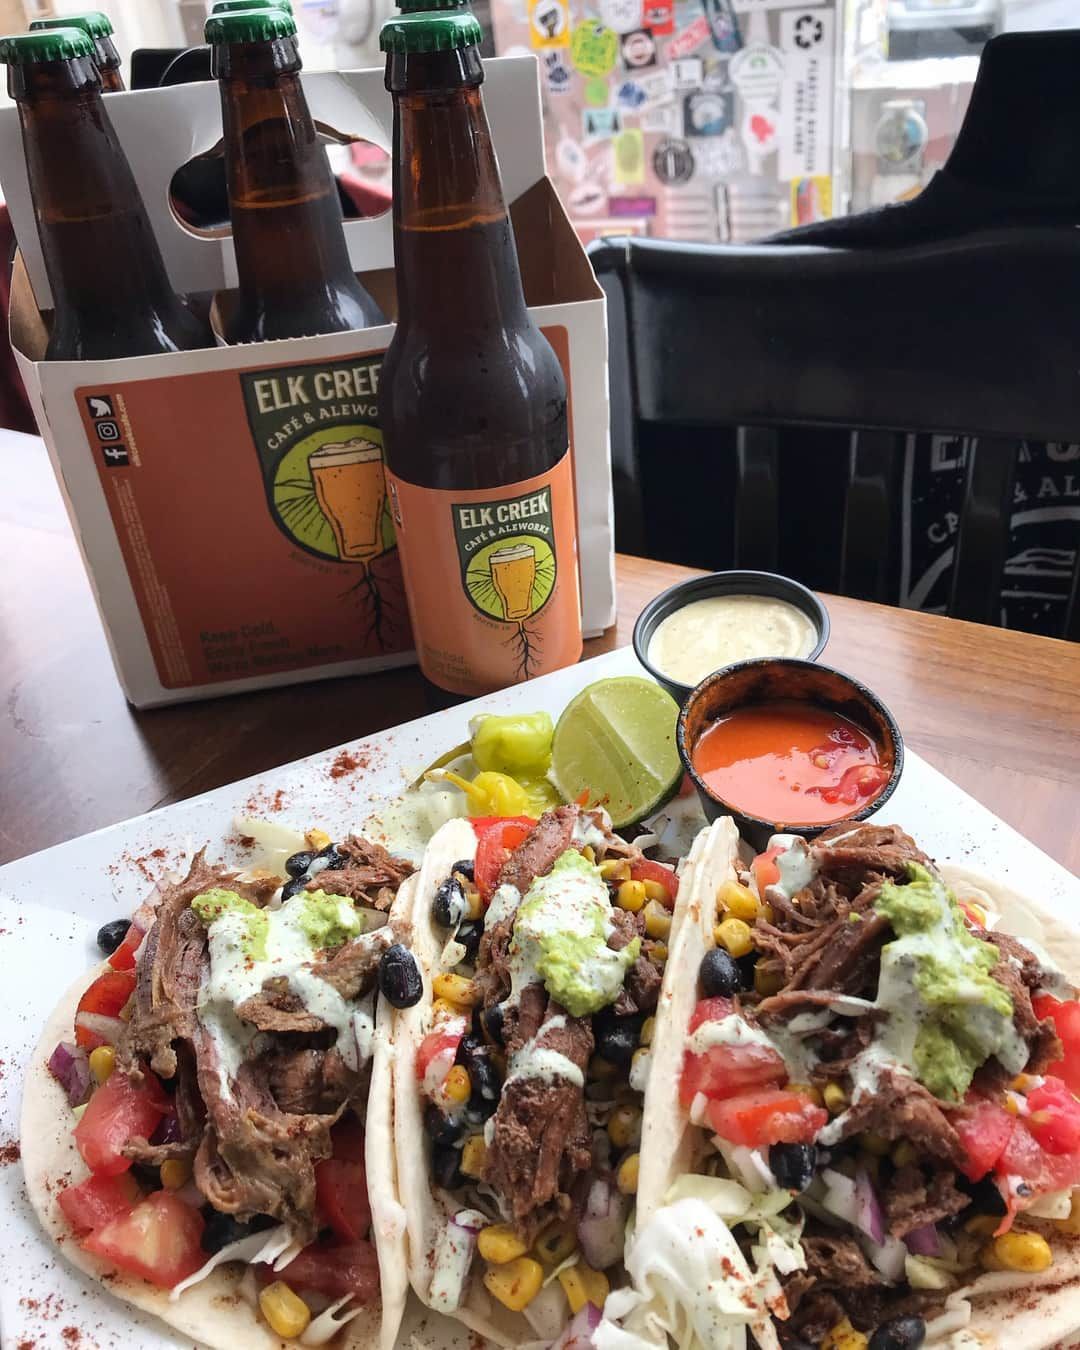 @elkcreekcafe + Aleworks is a popular brewery bistro known for its delicious farm-to-fork cuisine and hand-crafted ales. Located on Main Street in Millheim, Elk Creek Cafe + Aleworks is available for takeout!
˙
Food and beer: Thursday through Saturday fro